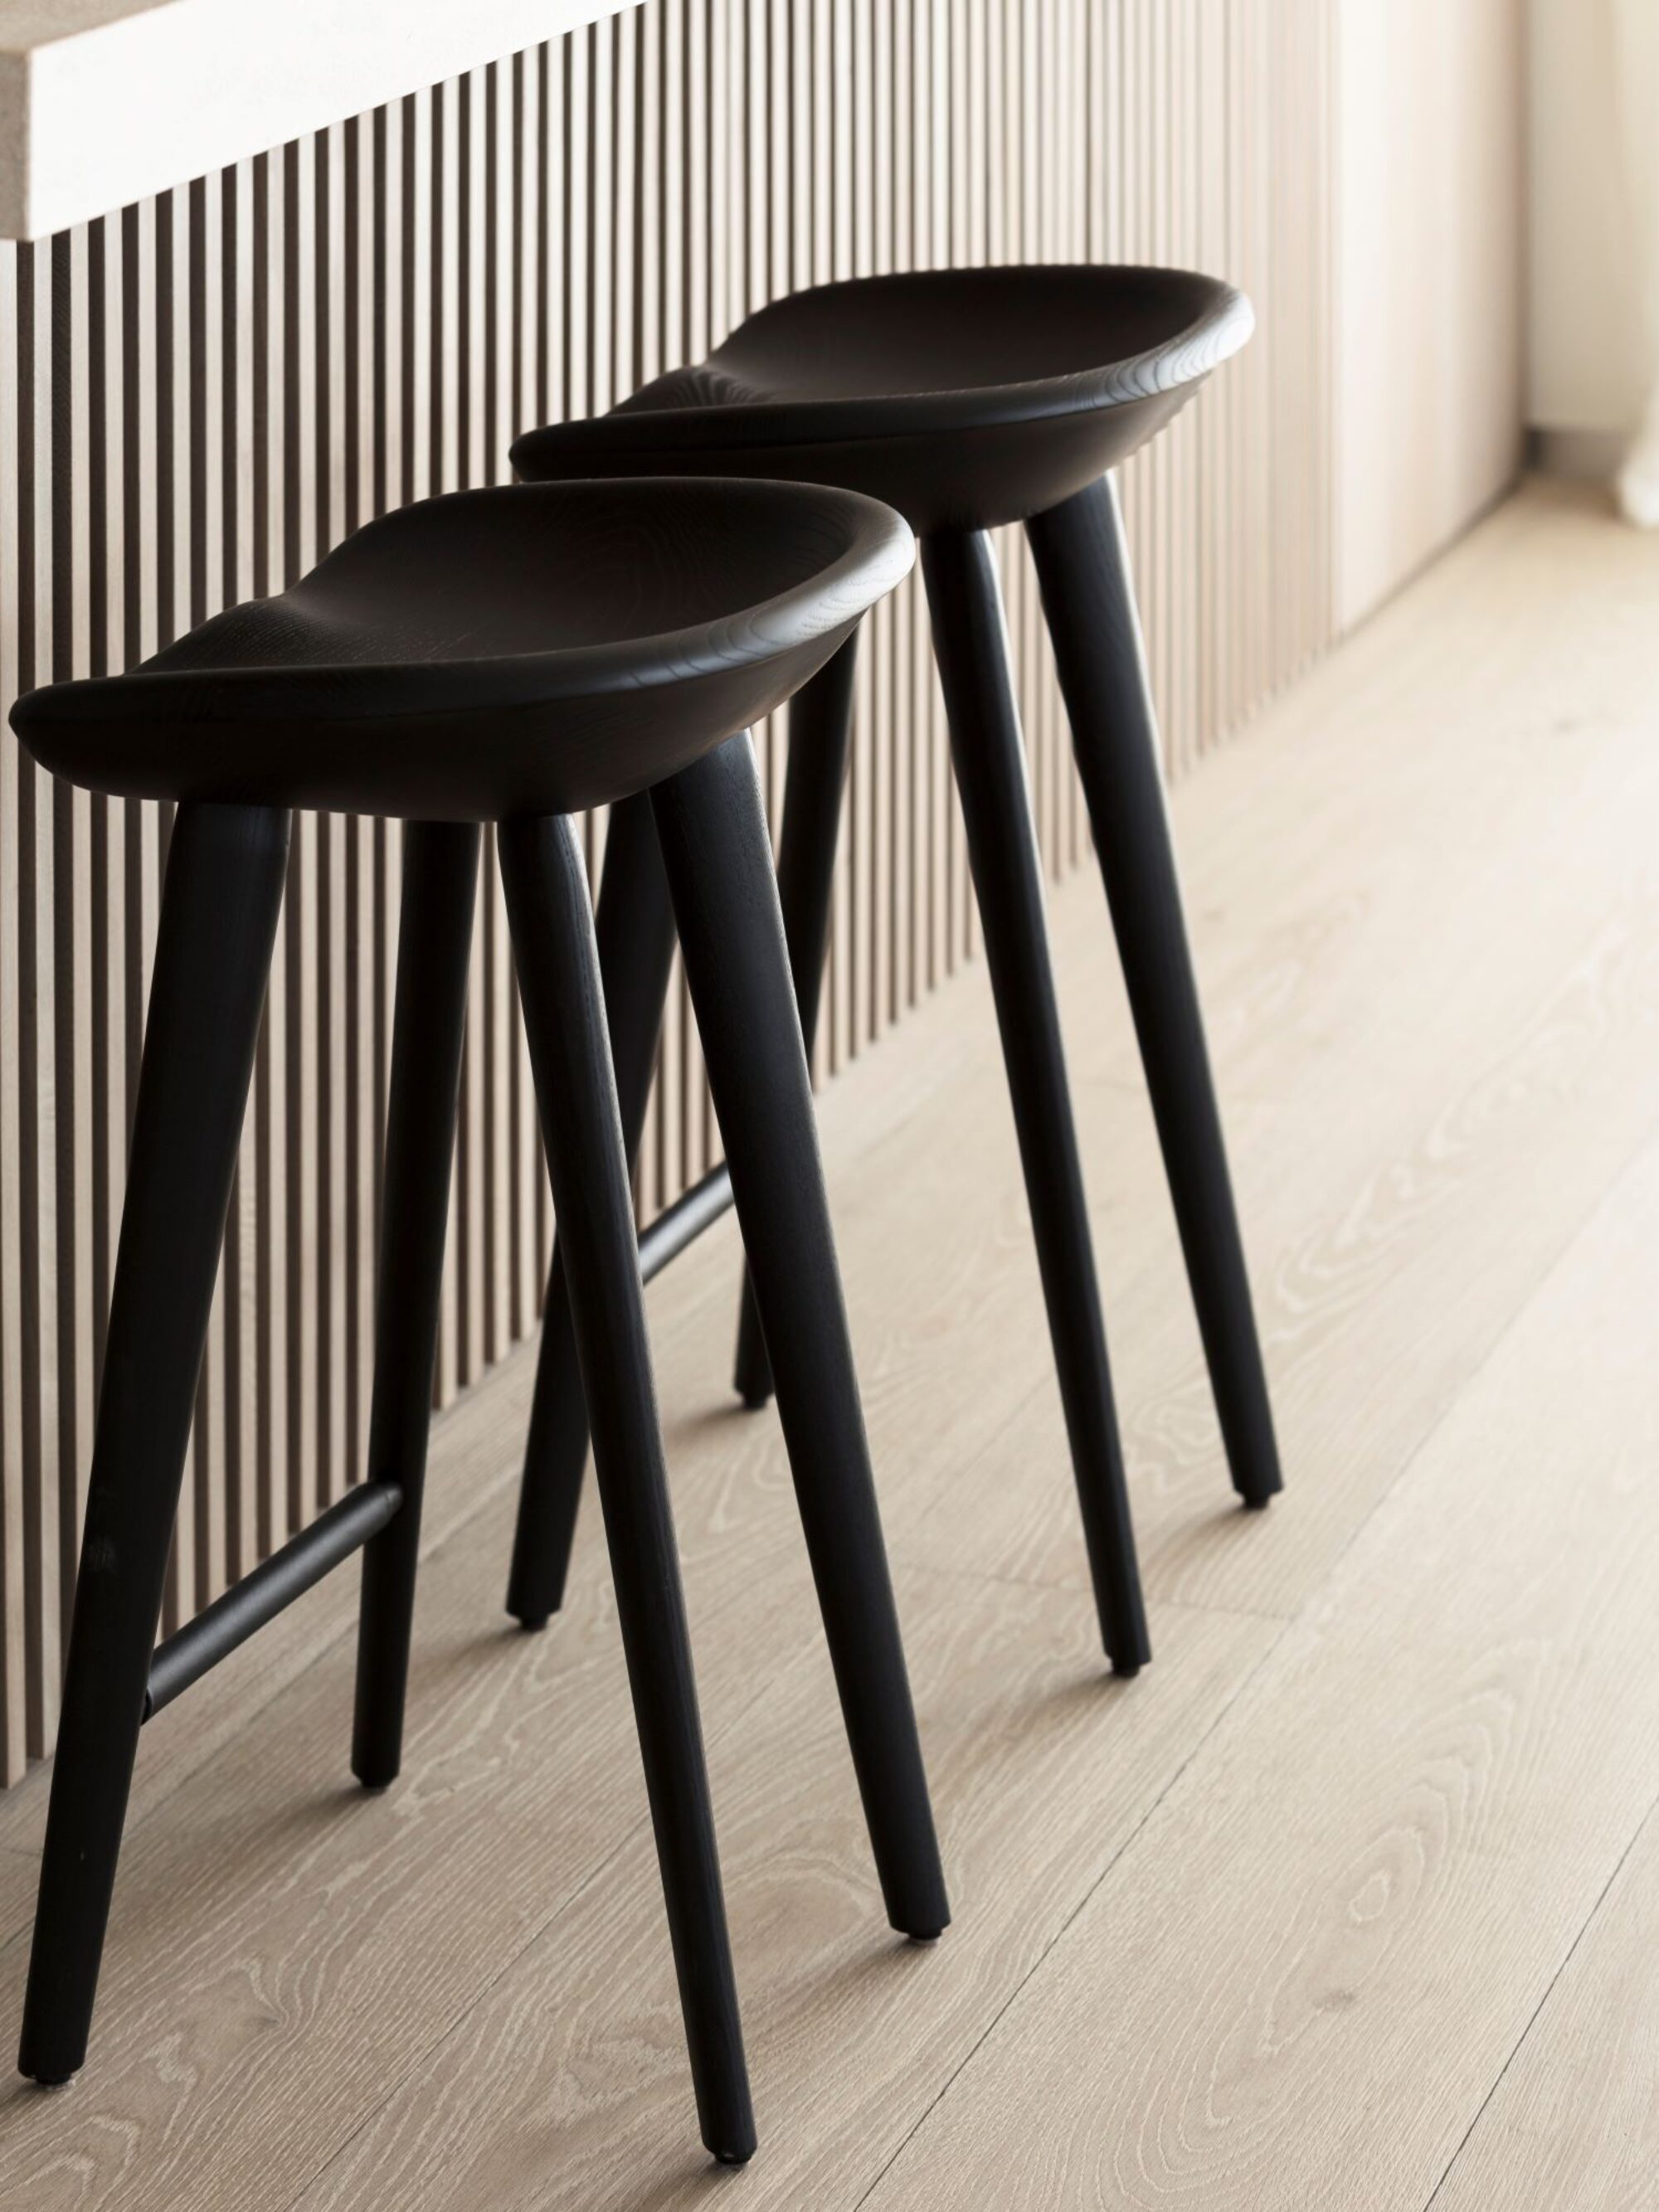 LONDON BLOOMSBURY with kitchen stools close up